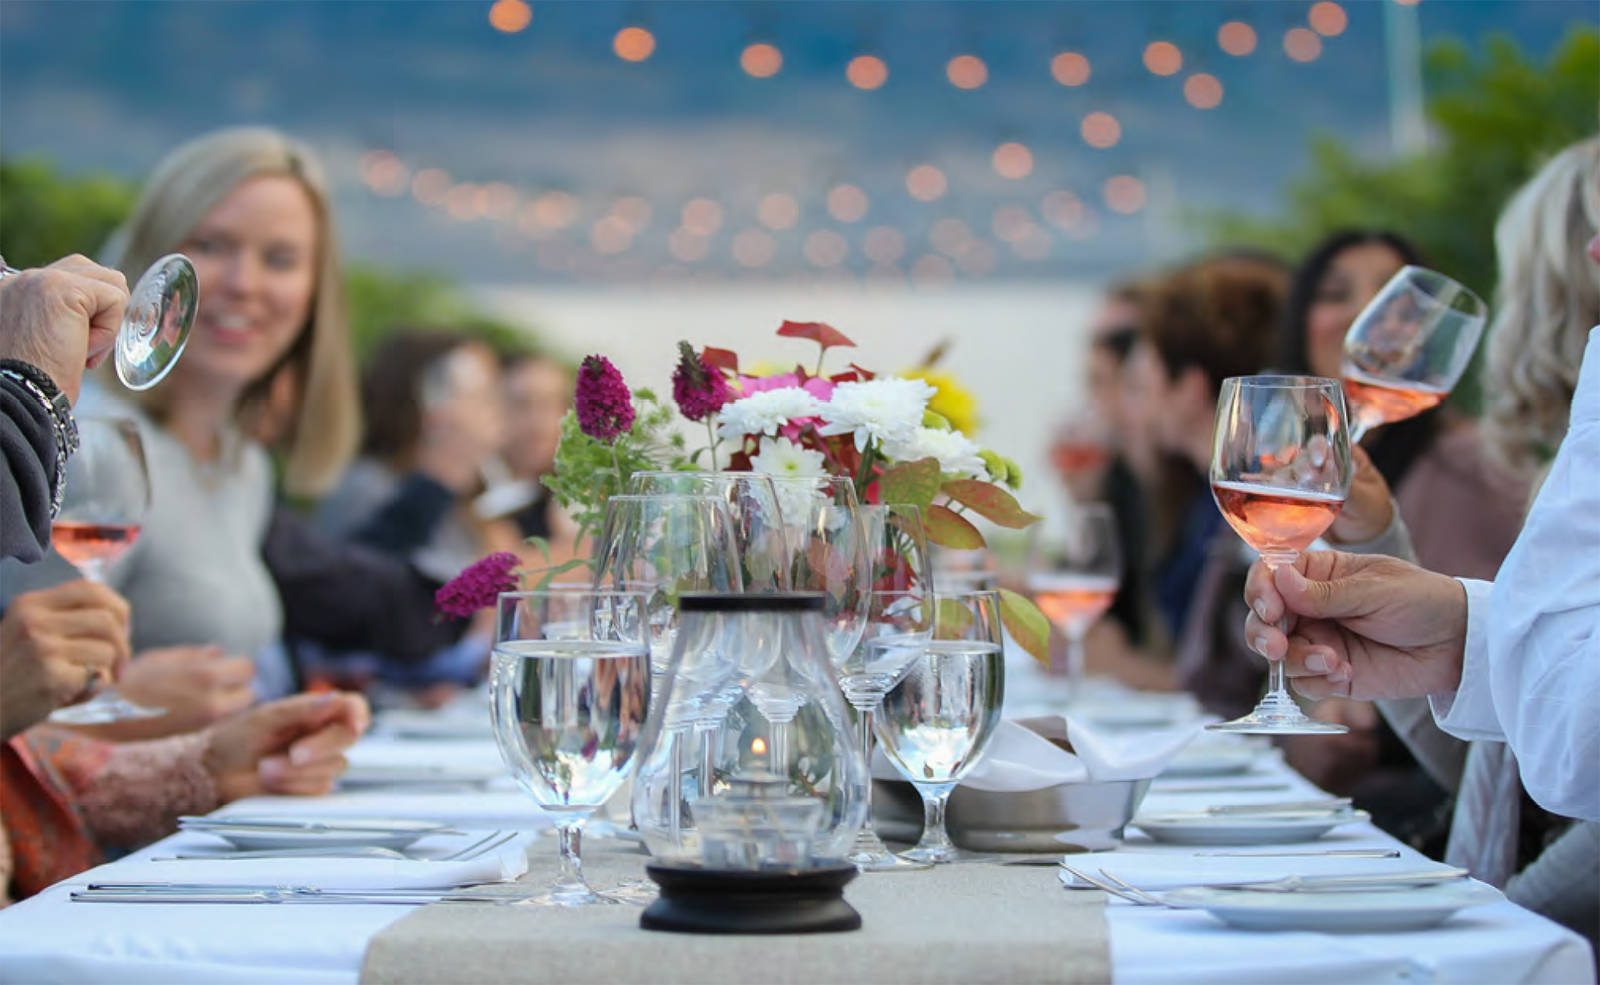 Quails Gate Winery Dinner in the Vineyard. Photo courtesy Tourism Kelowna